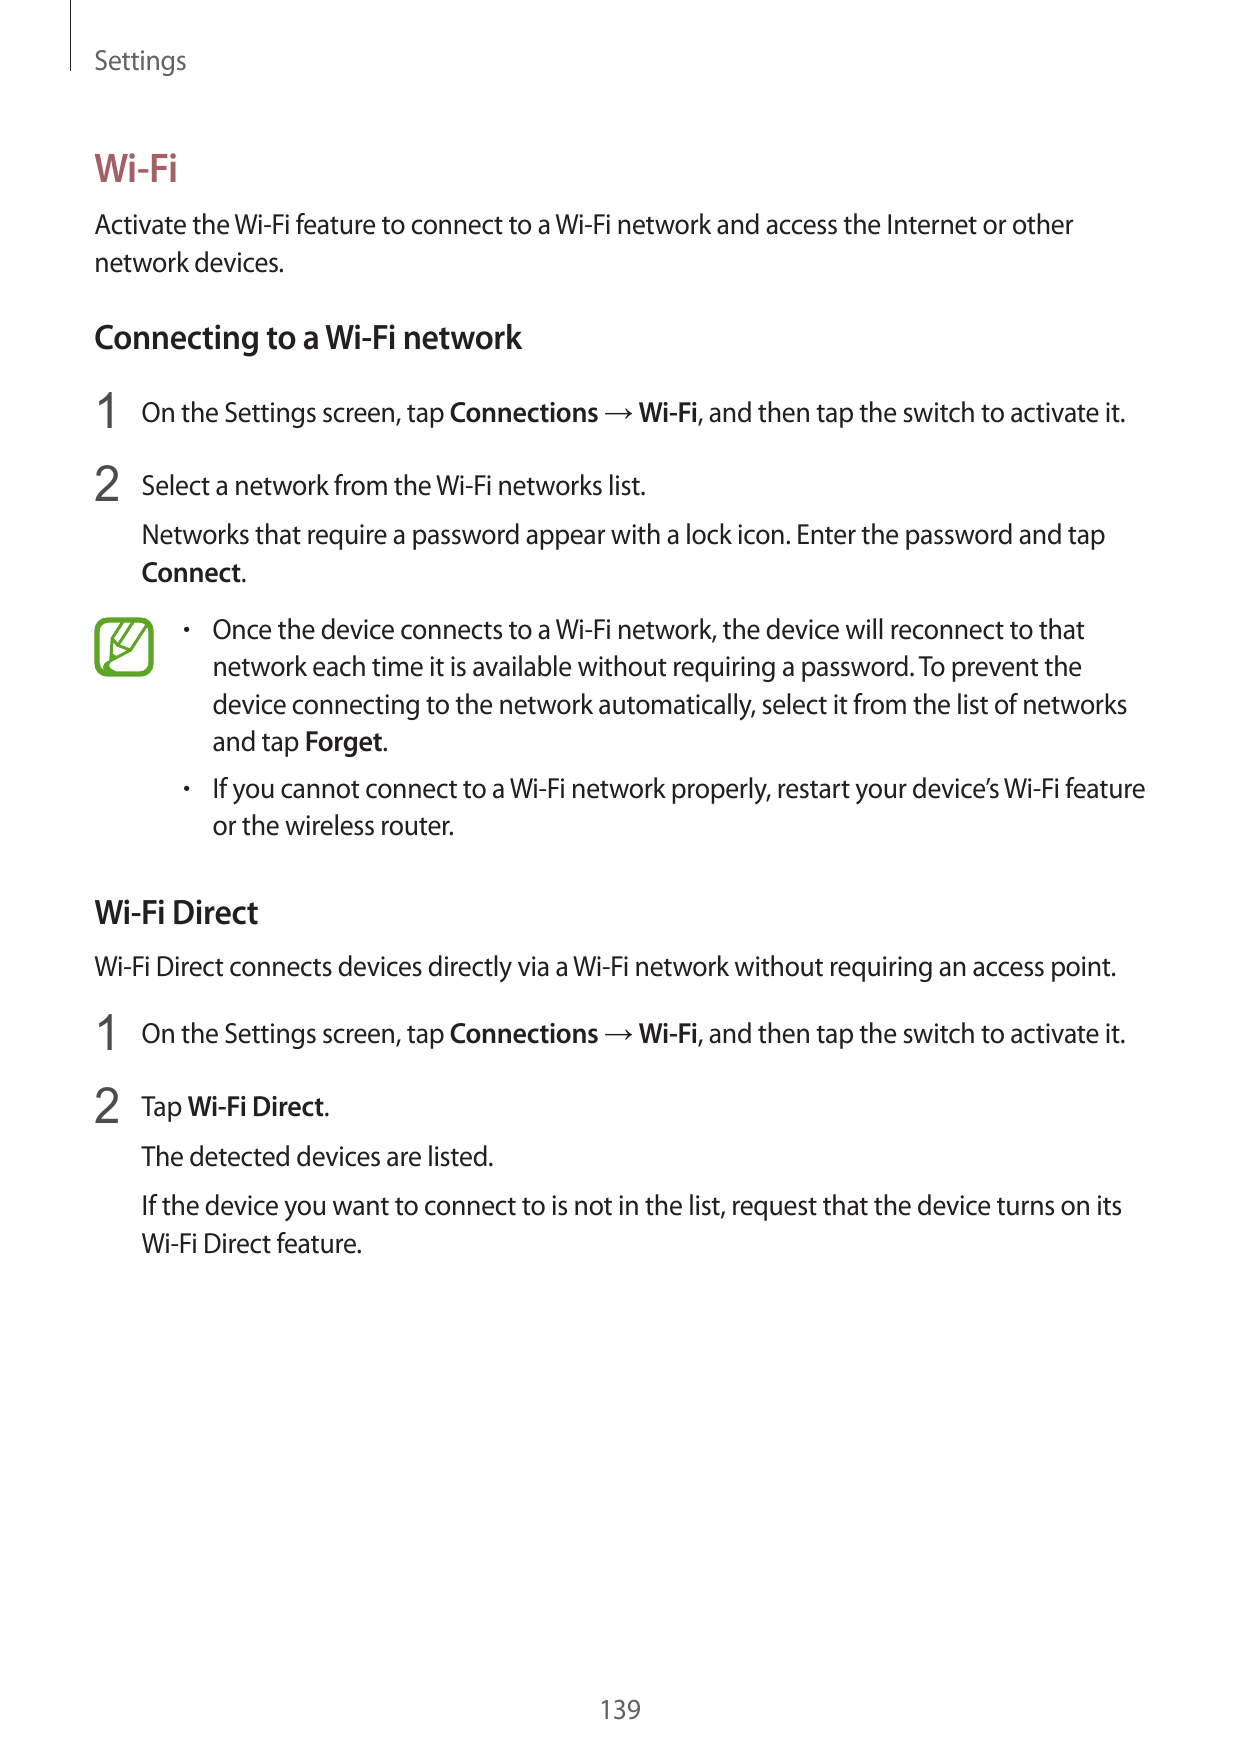 SettingsWi-FiActivate the Wi-Fi feature to connect to a Wi-Fi network and access the Internet or othernetwork devices.Connecting